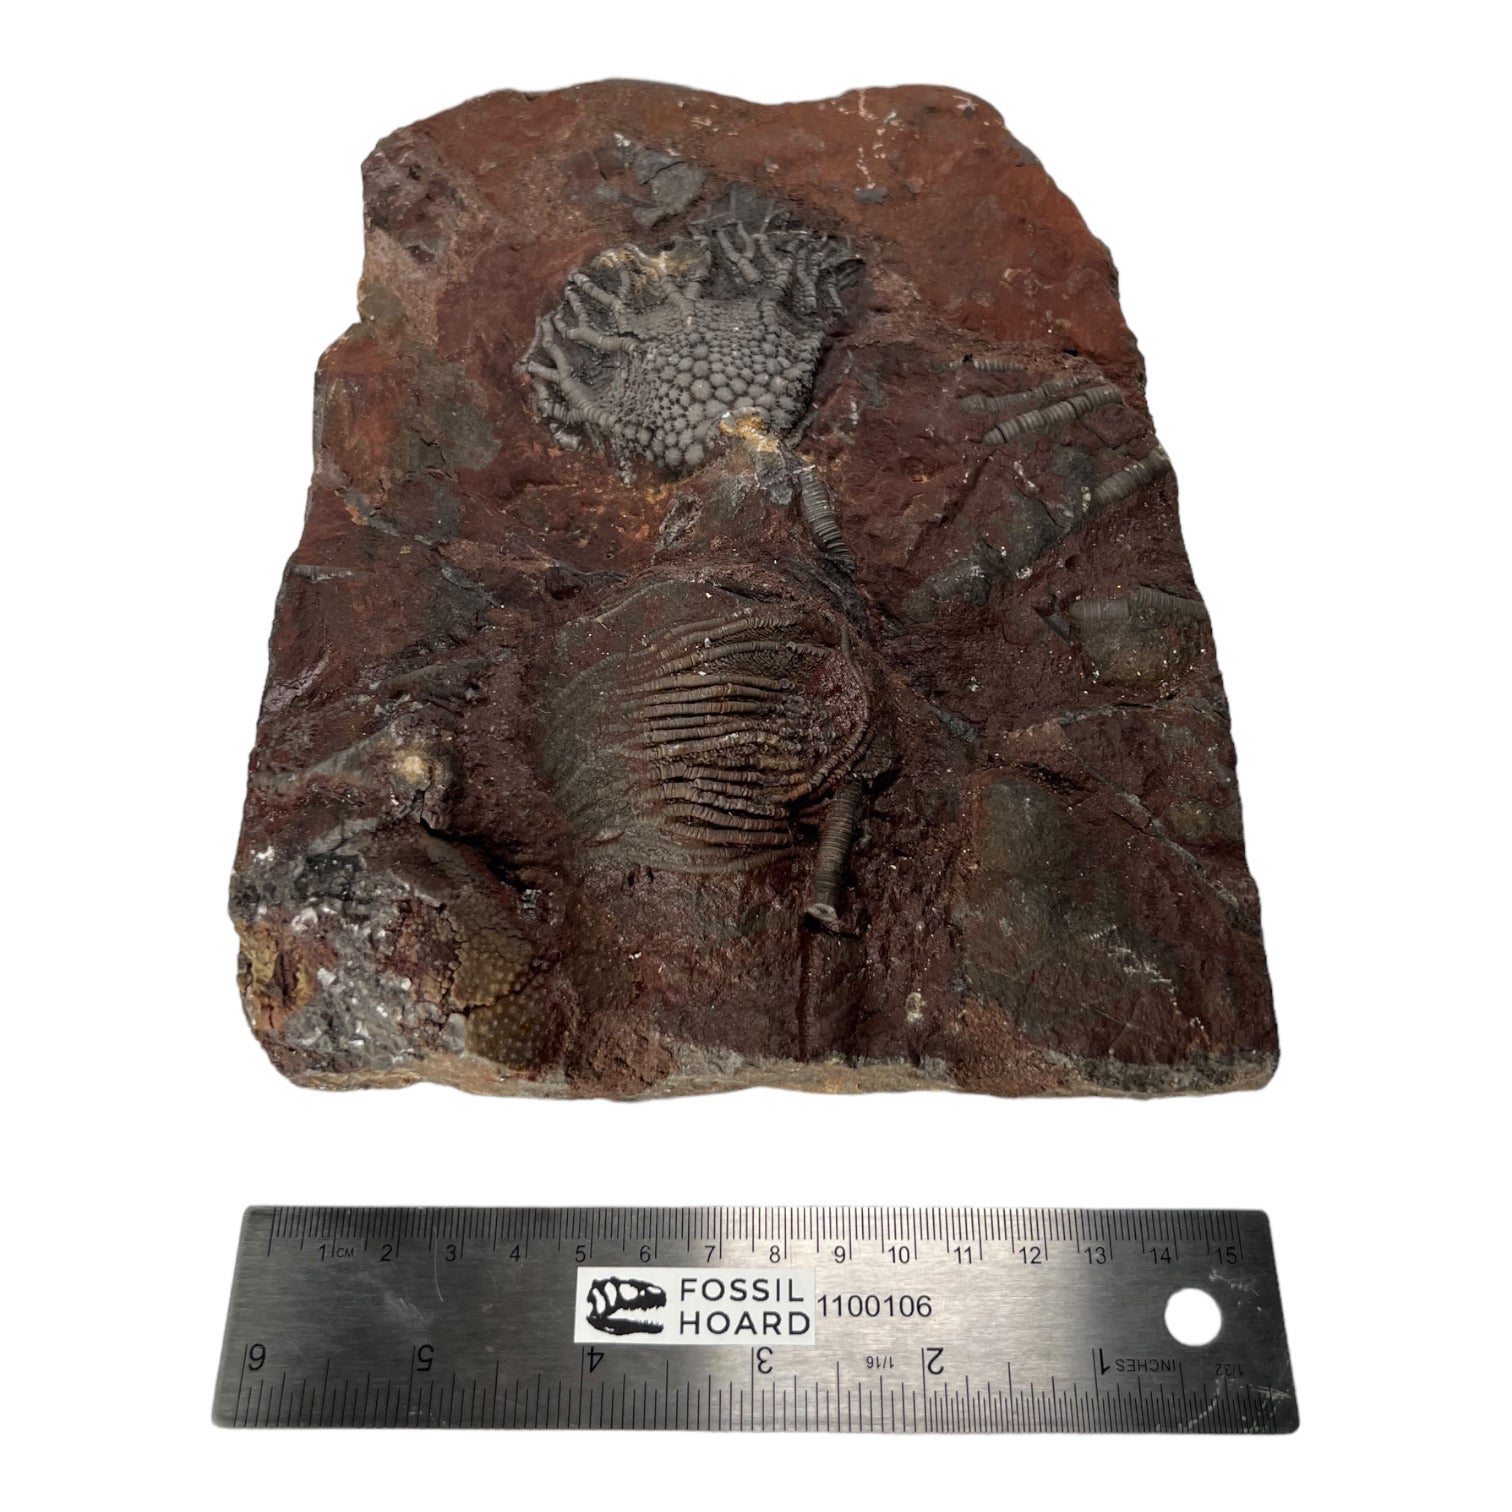 #8 Fossil Crinoid Plate (Scyphocrinites), 8 by 6 inches - Silurian Period - 423 to 419.2 MYA - Morocco